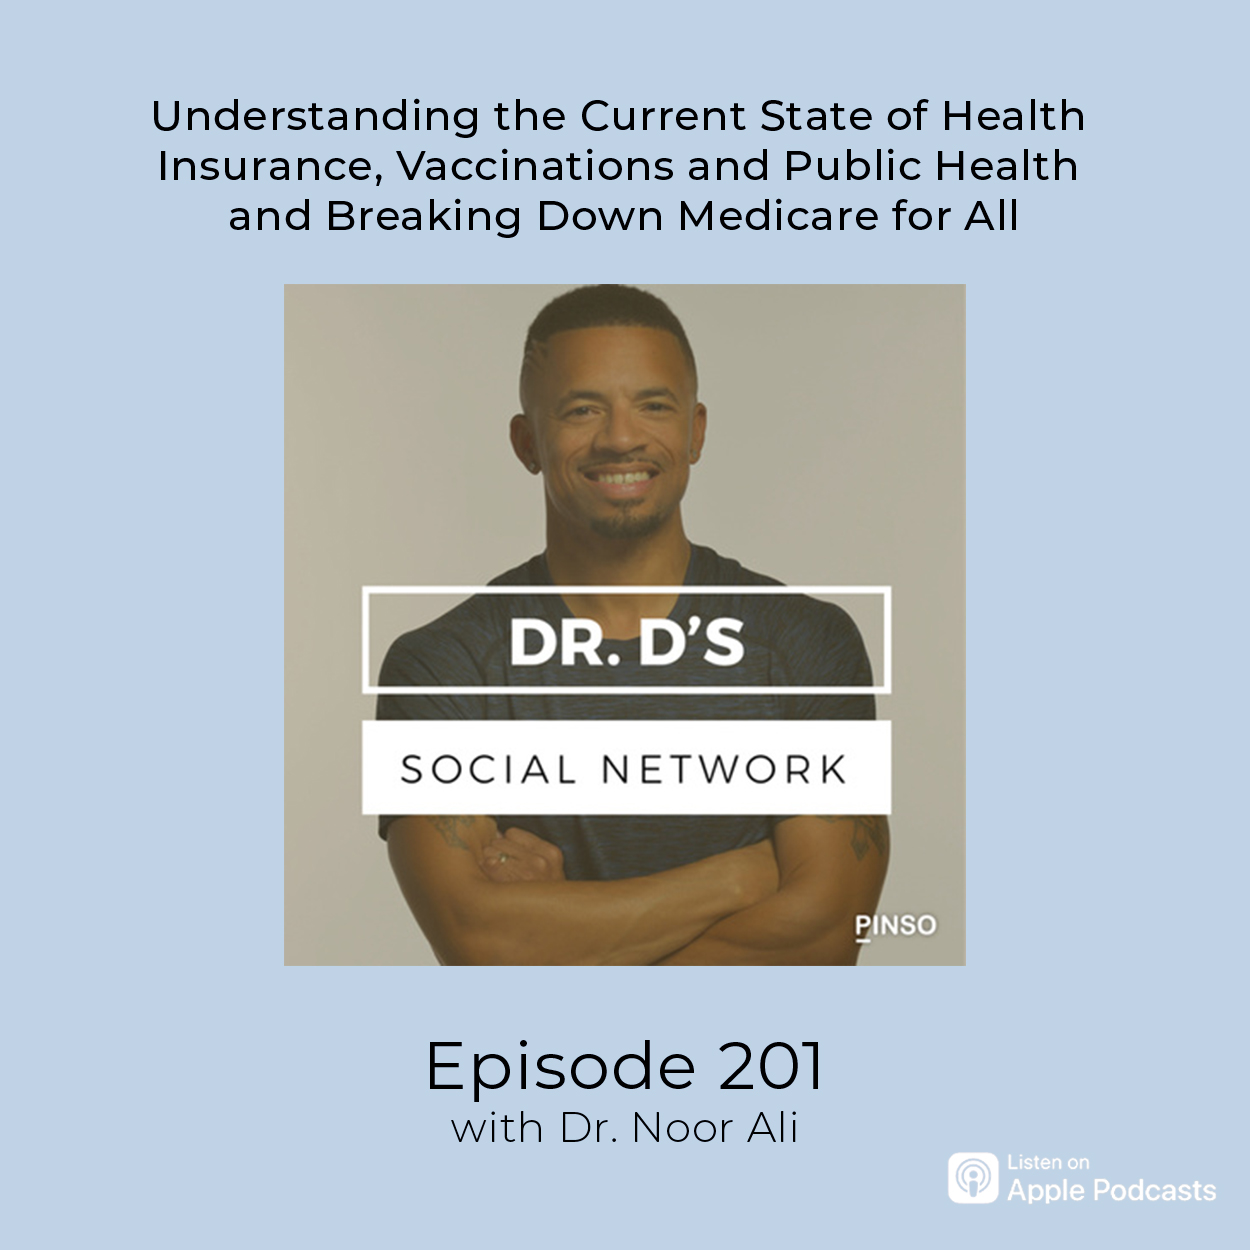 Episode 201 with Dr. Noor and Dr. D